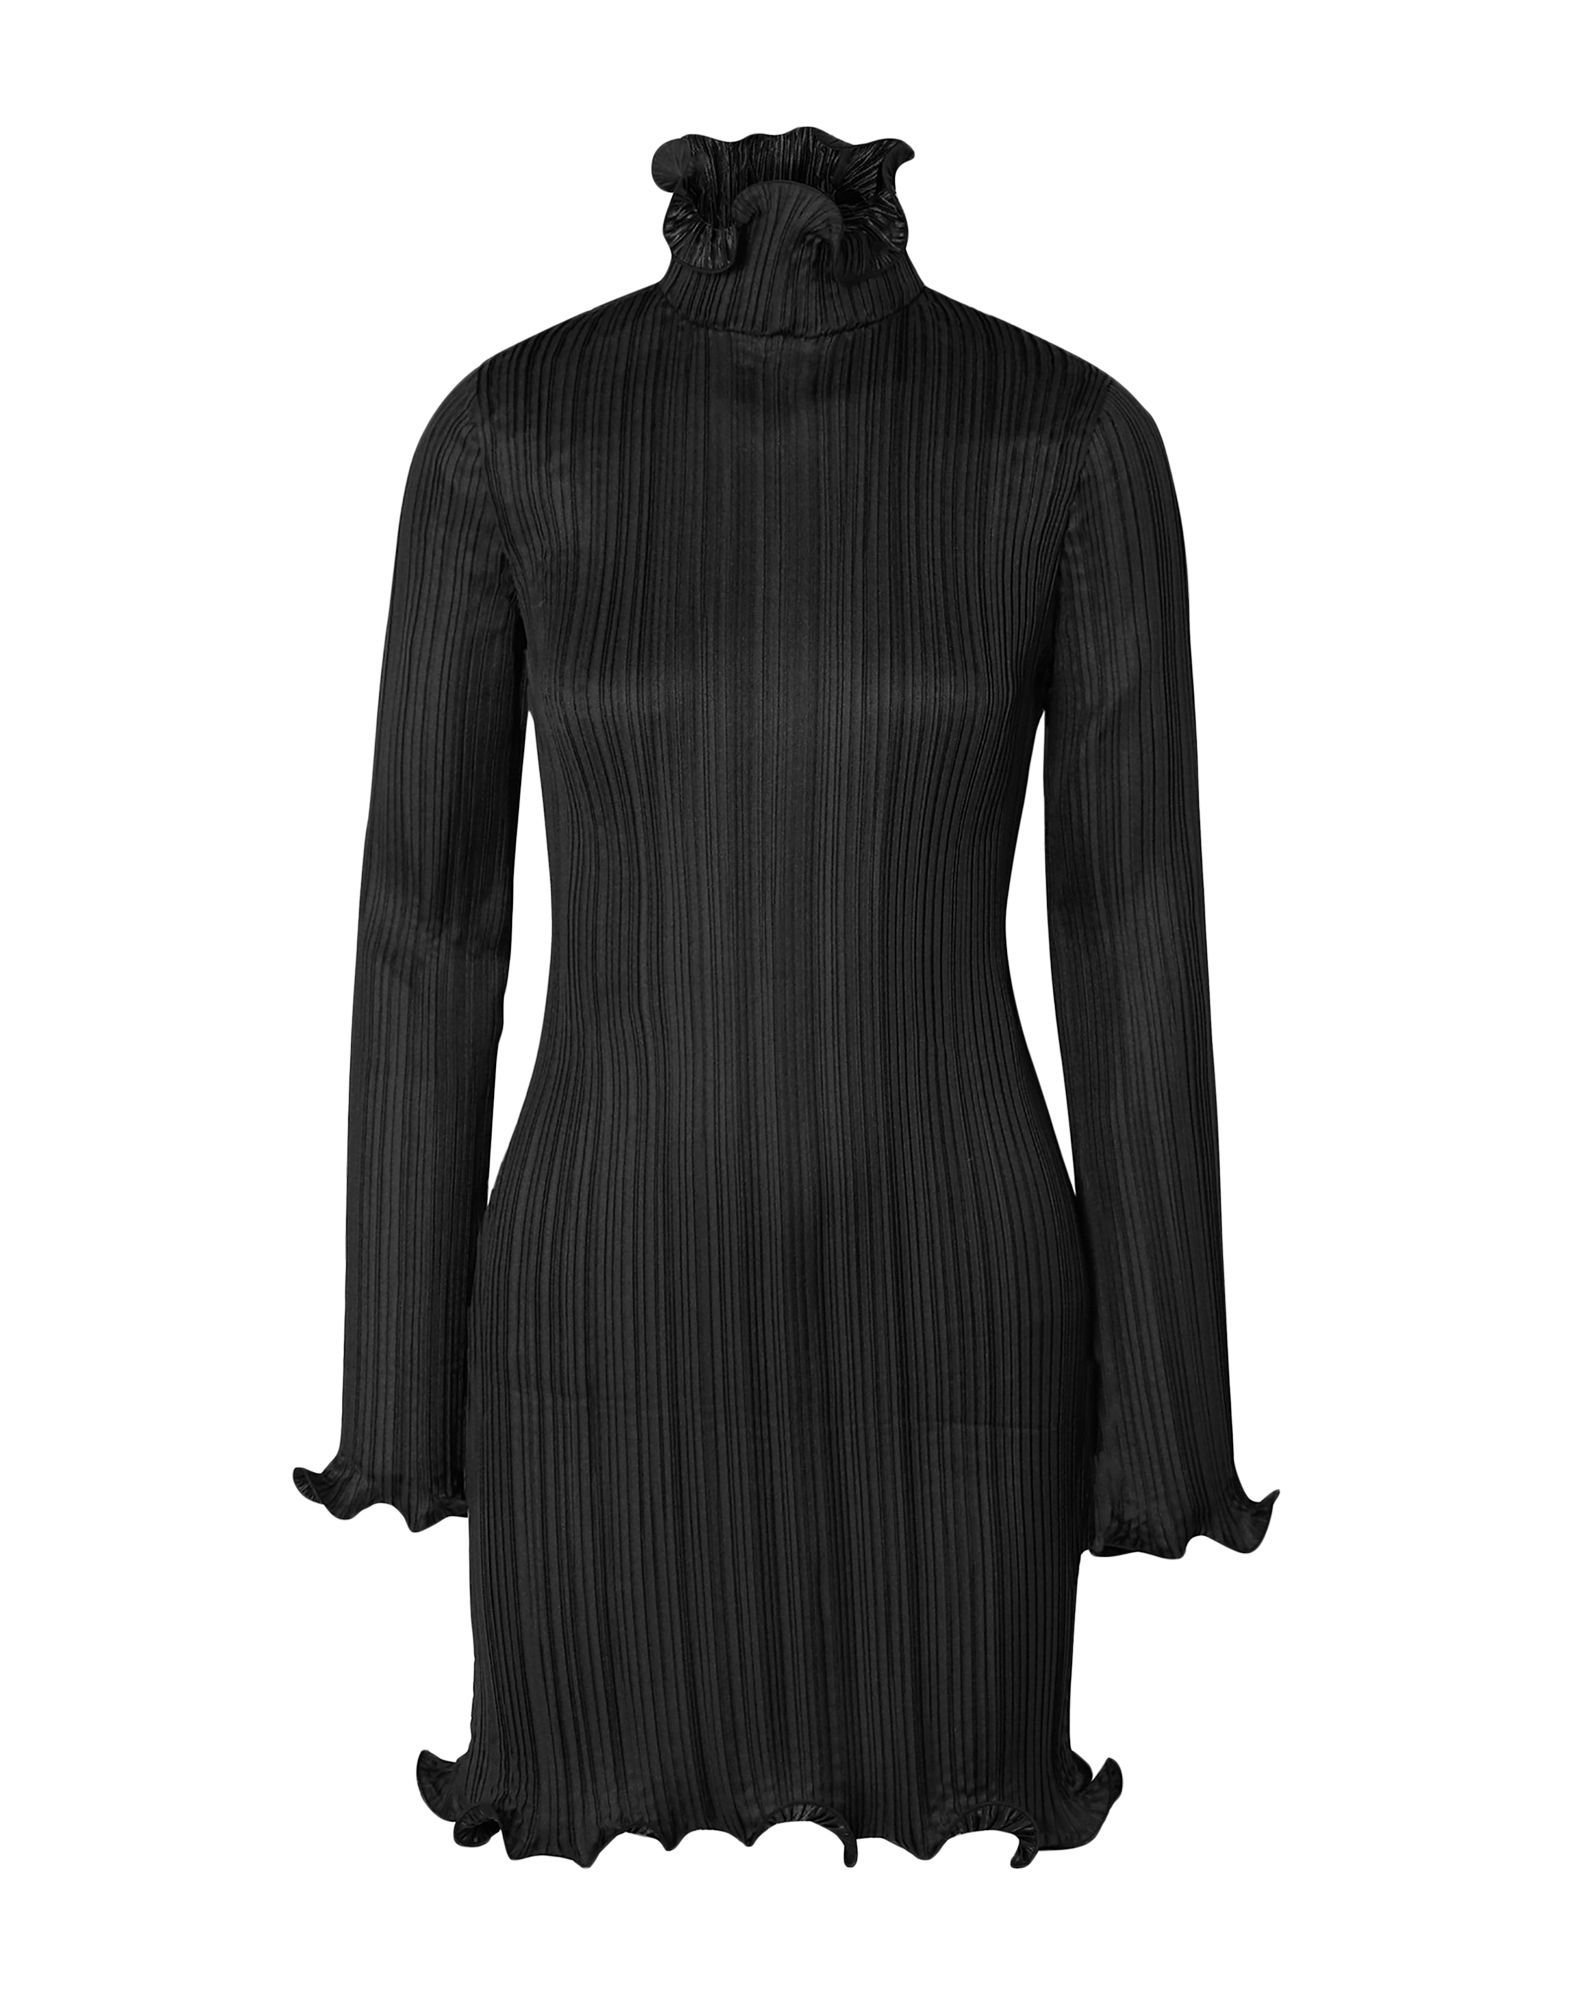 satin, pleated, no appliqués, basic solid colour, turtleneck, long sleeves, no pockets, no fastening, unlined